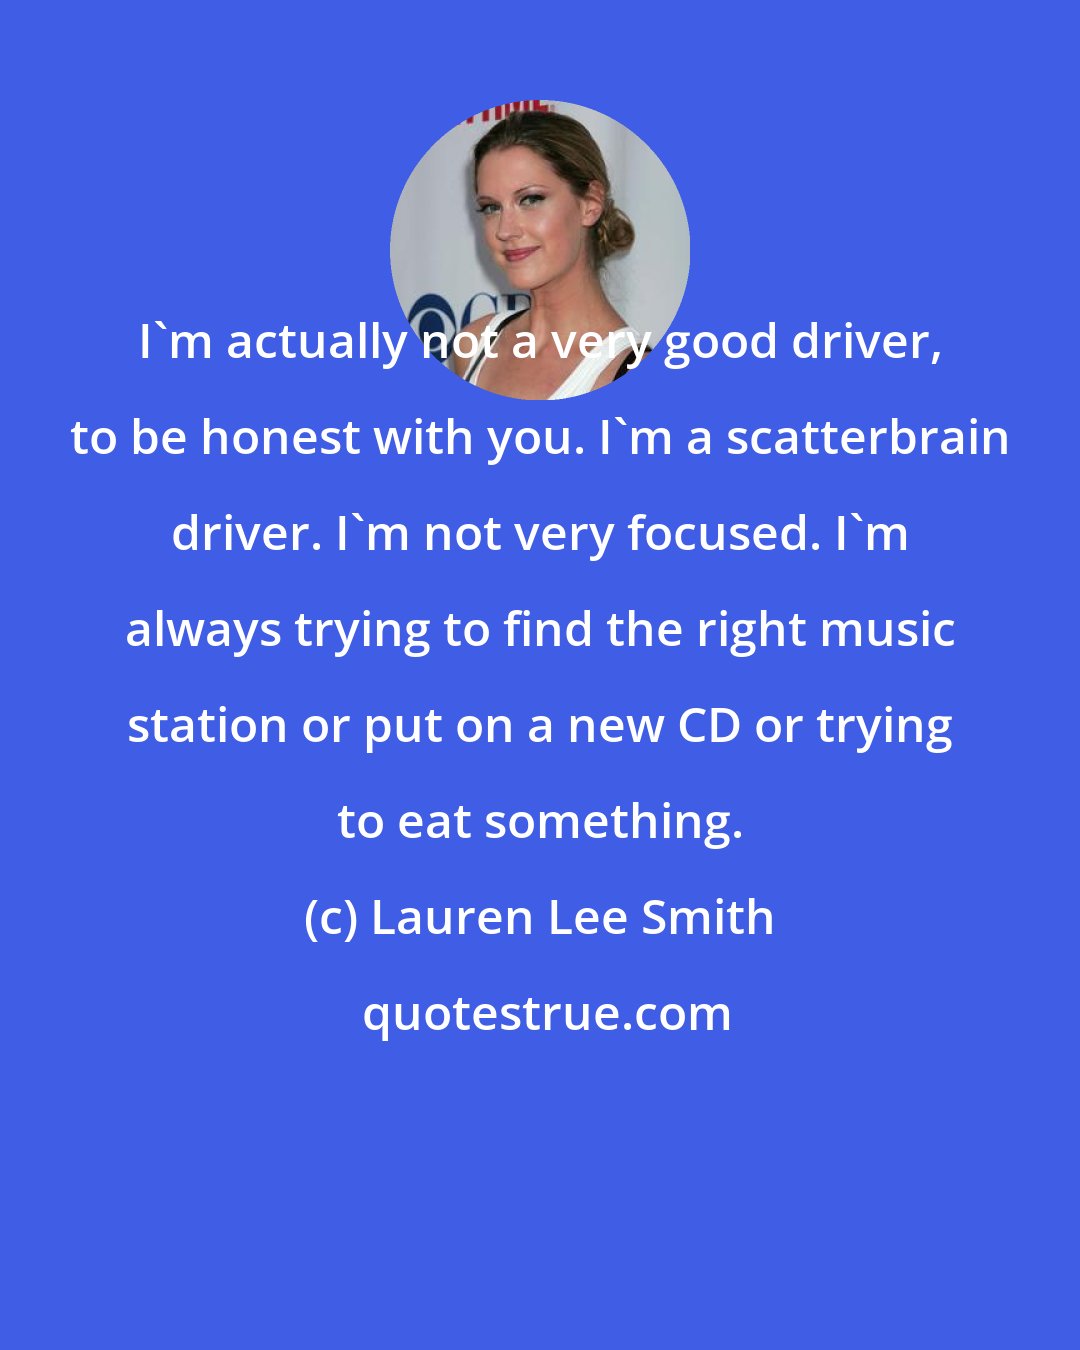 Lauren Lee Smith: I'm actually not a very good driver, to be honest with you. I'm a scatterbrain driver. I'm not very focused. I'm always trying to find the right music station or put on a new CD or trying to eat something.